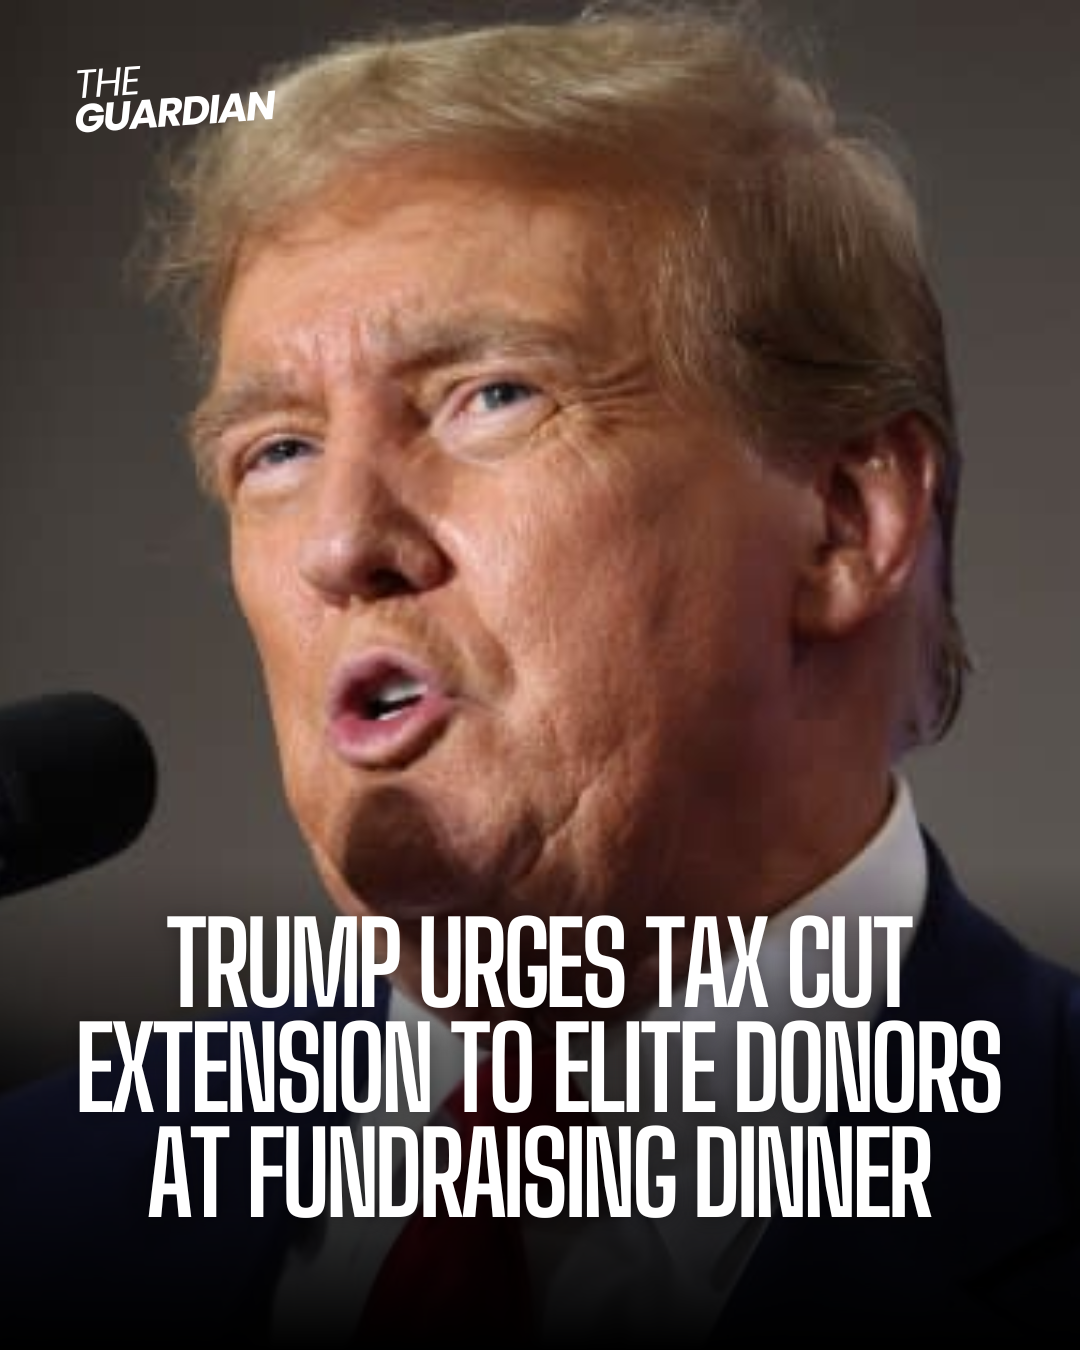 At a private fundraising dinner, Donald Trump emphasises the need of extending his trademark tax cuts to rich political donors.